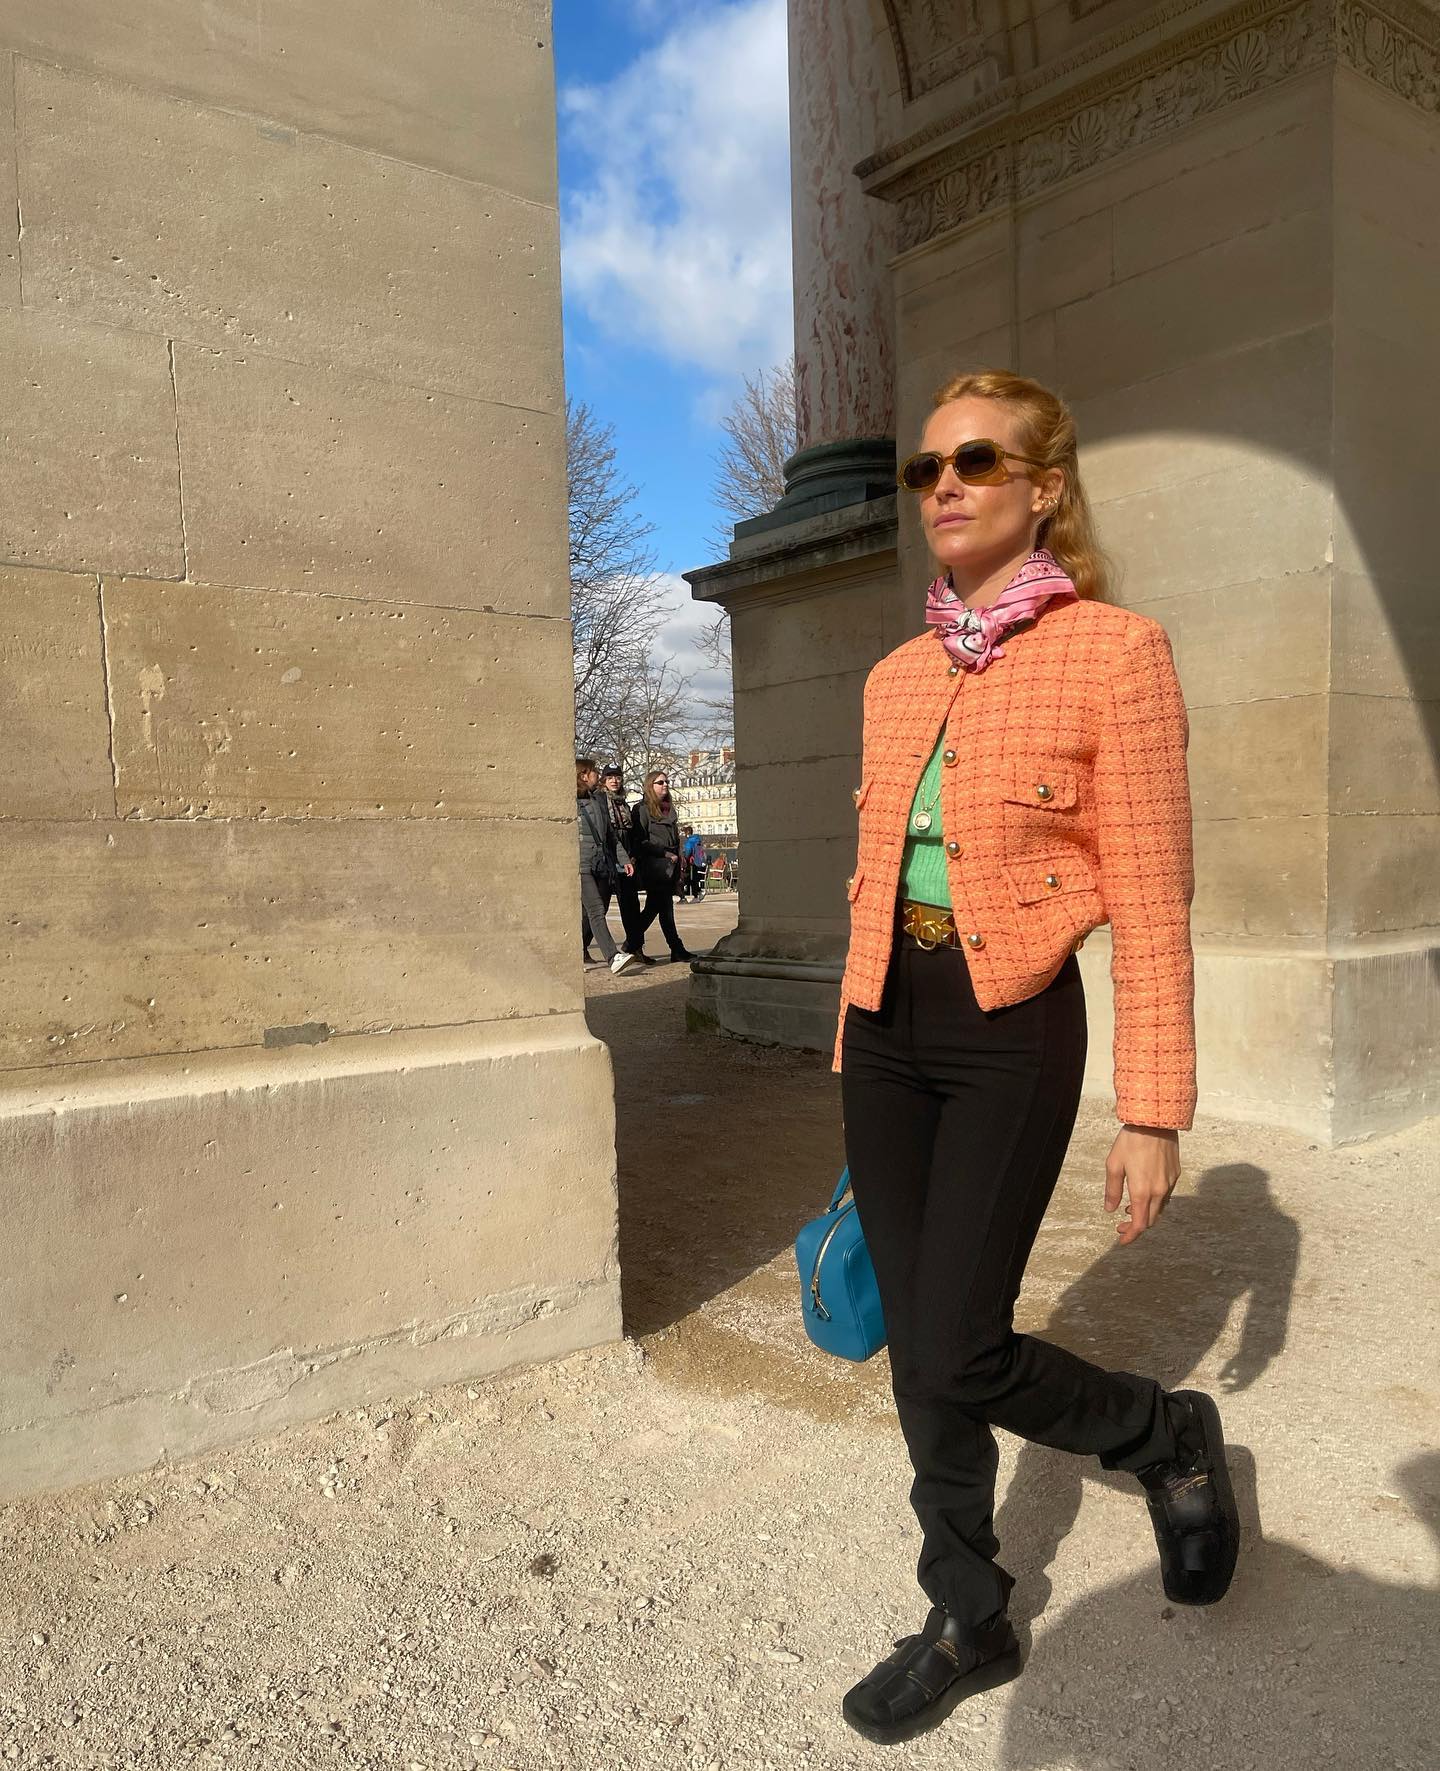 Blanca wearing Mango jacket with jeans and a neck scarf